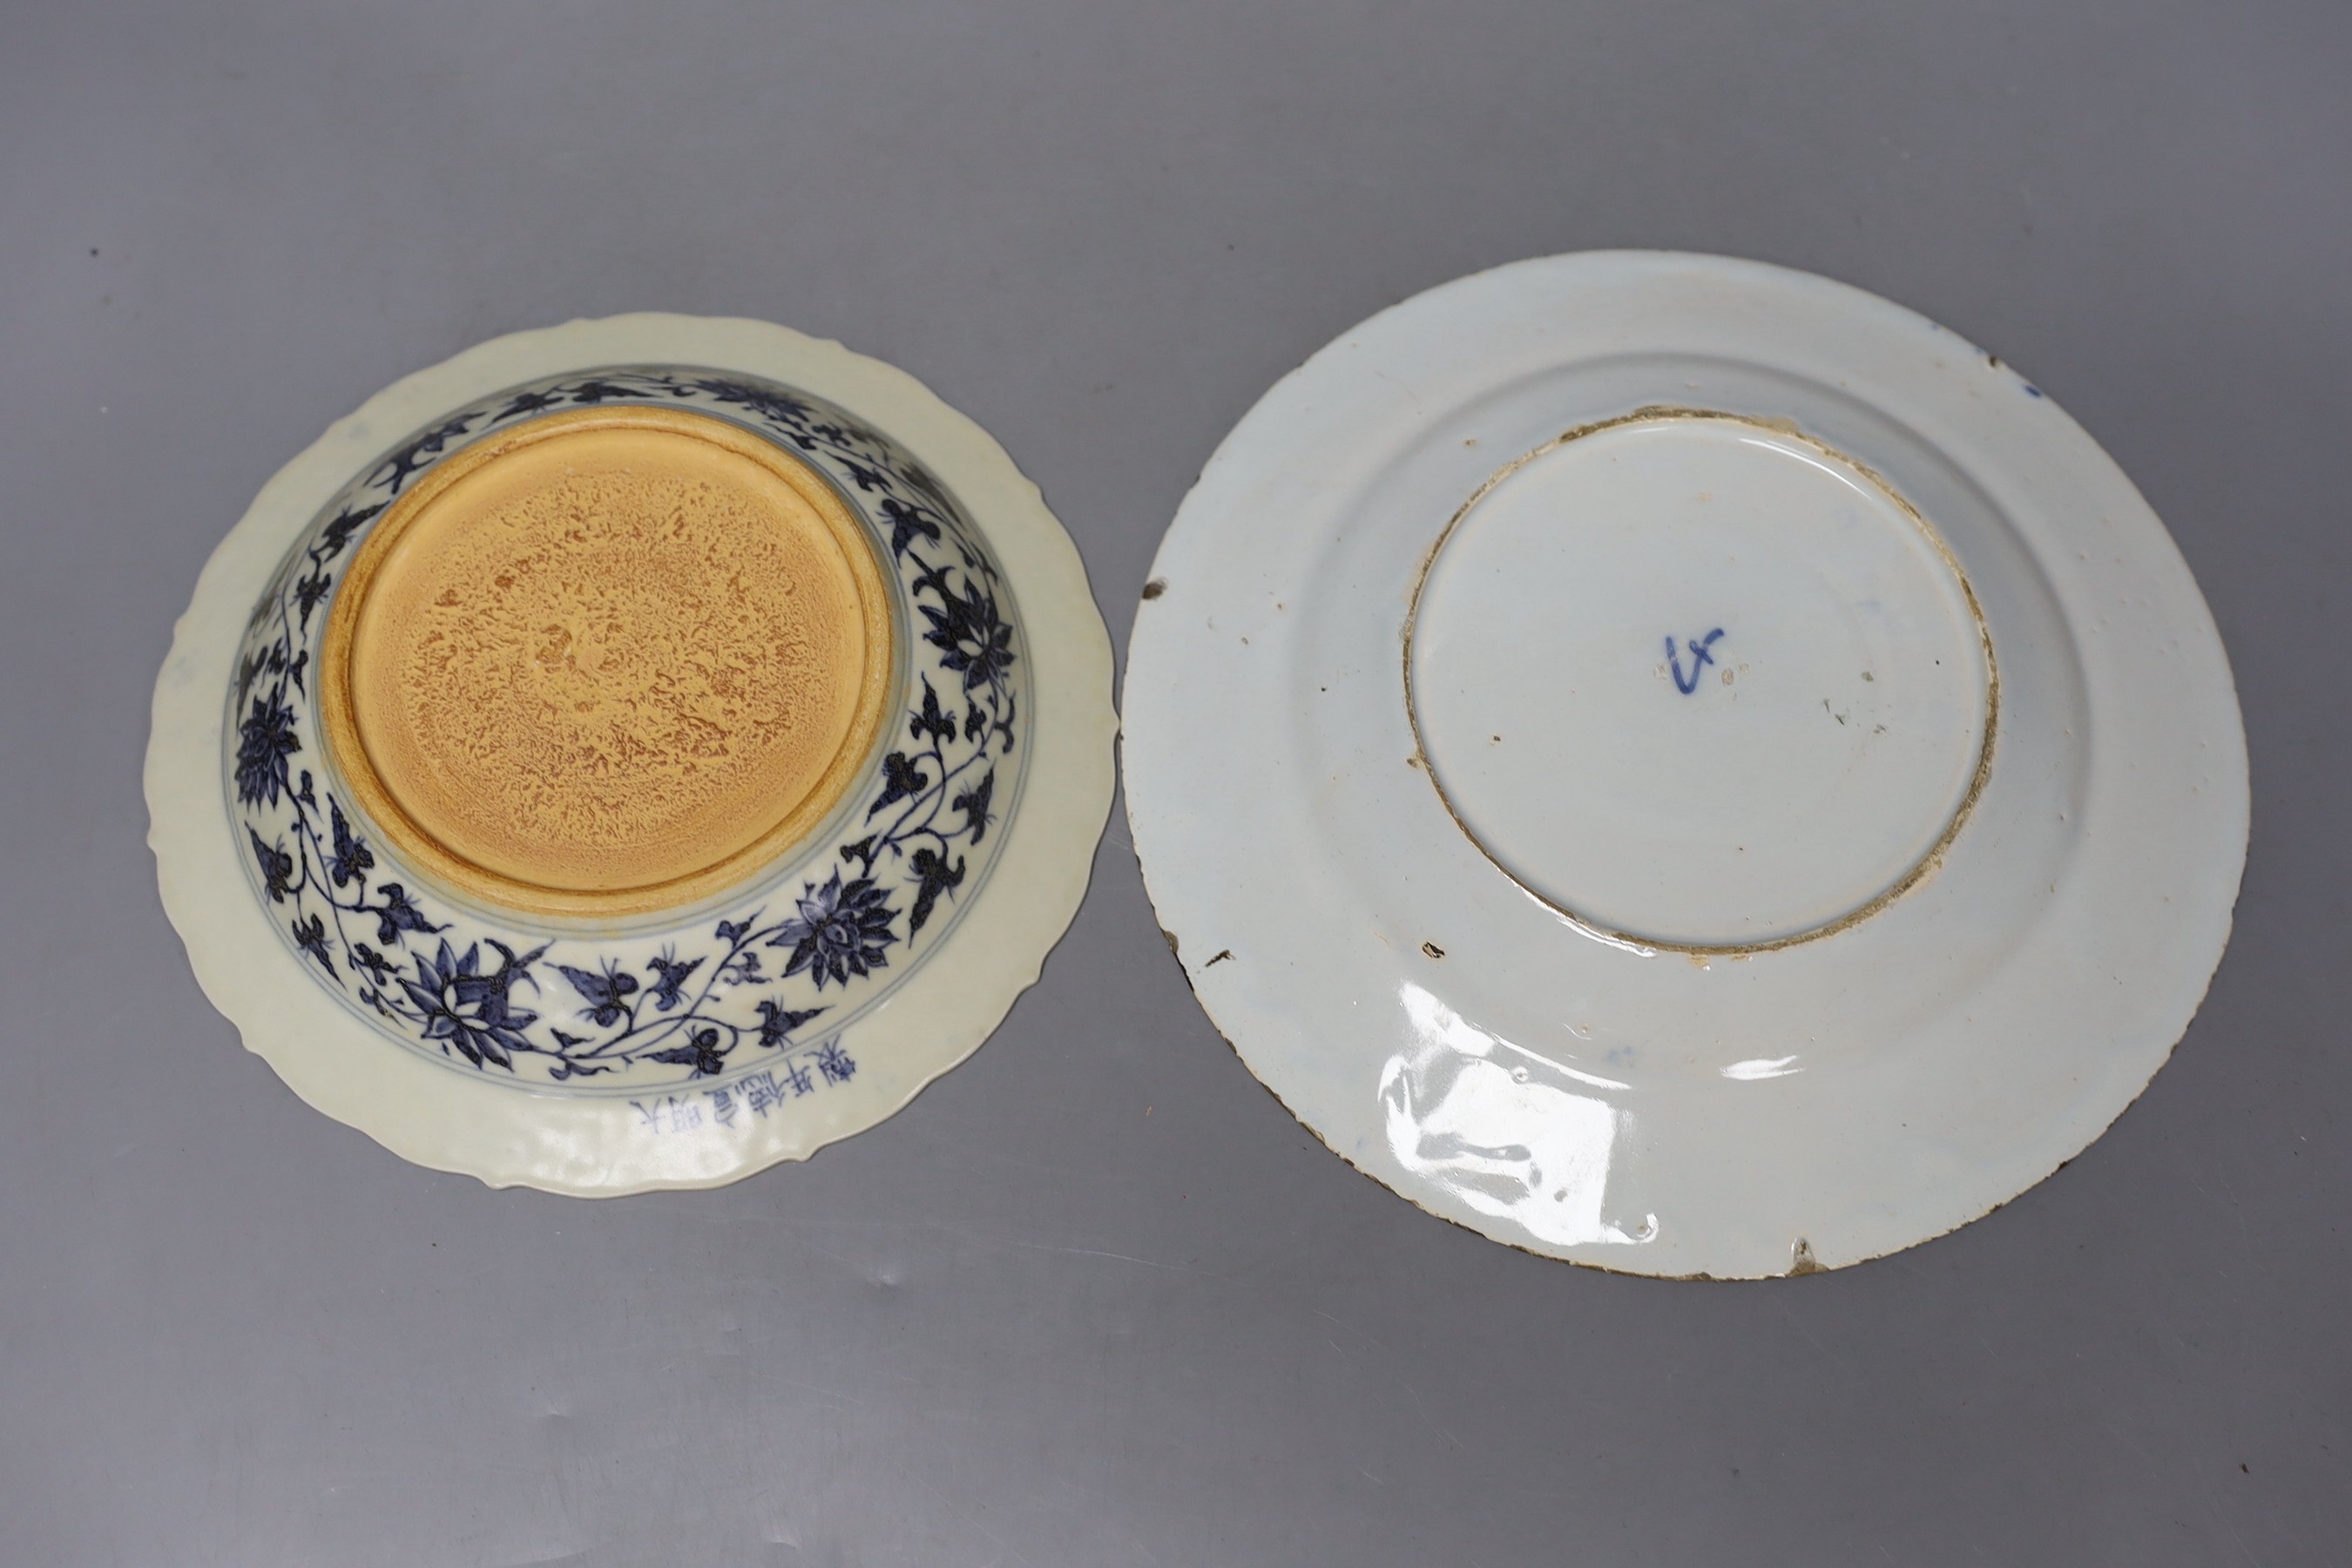 A Chinese sang-de-boeuf glazed pottery incense burner, 21cm high, s similar blue and white bowl and a famille rose footed dish together with a Delft plate.